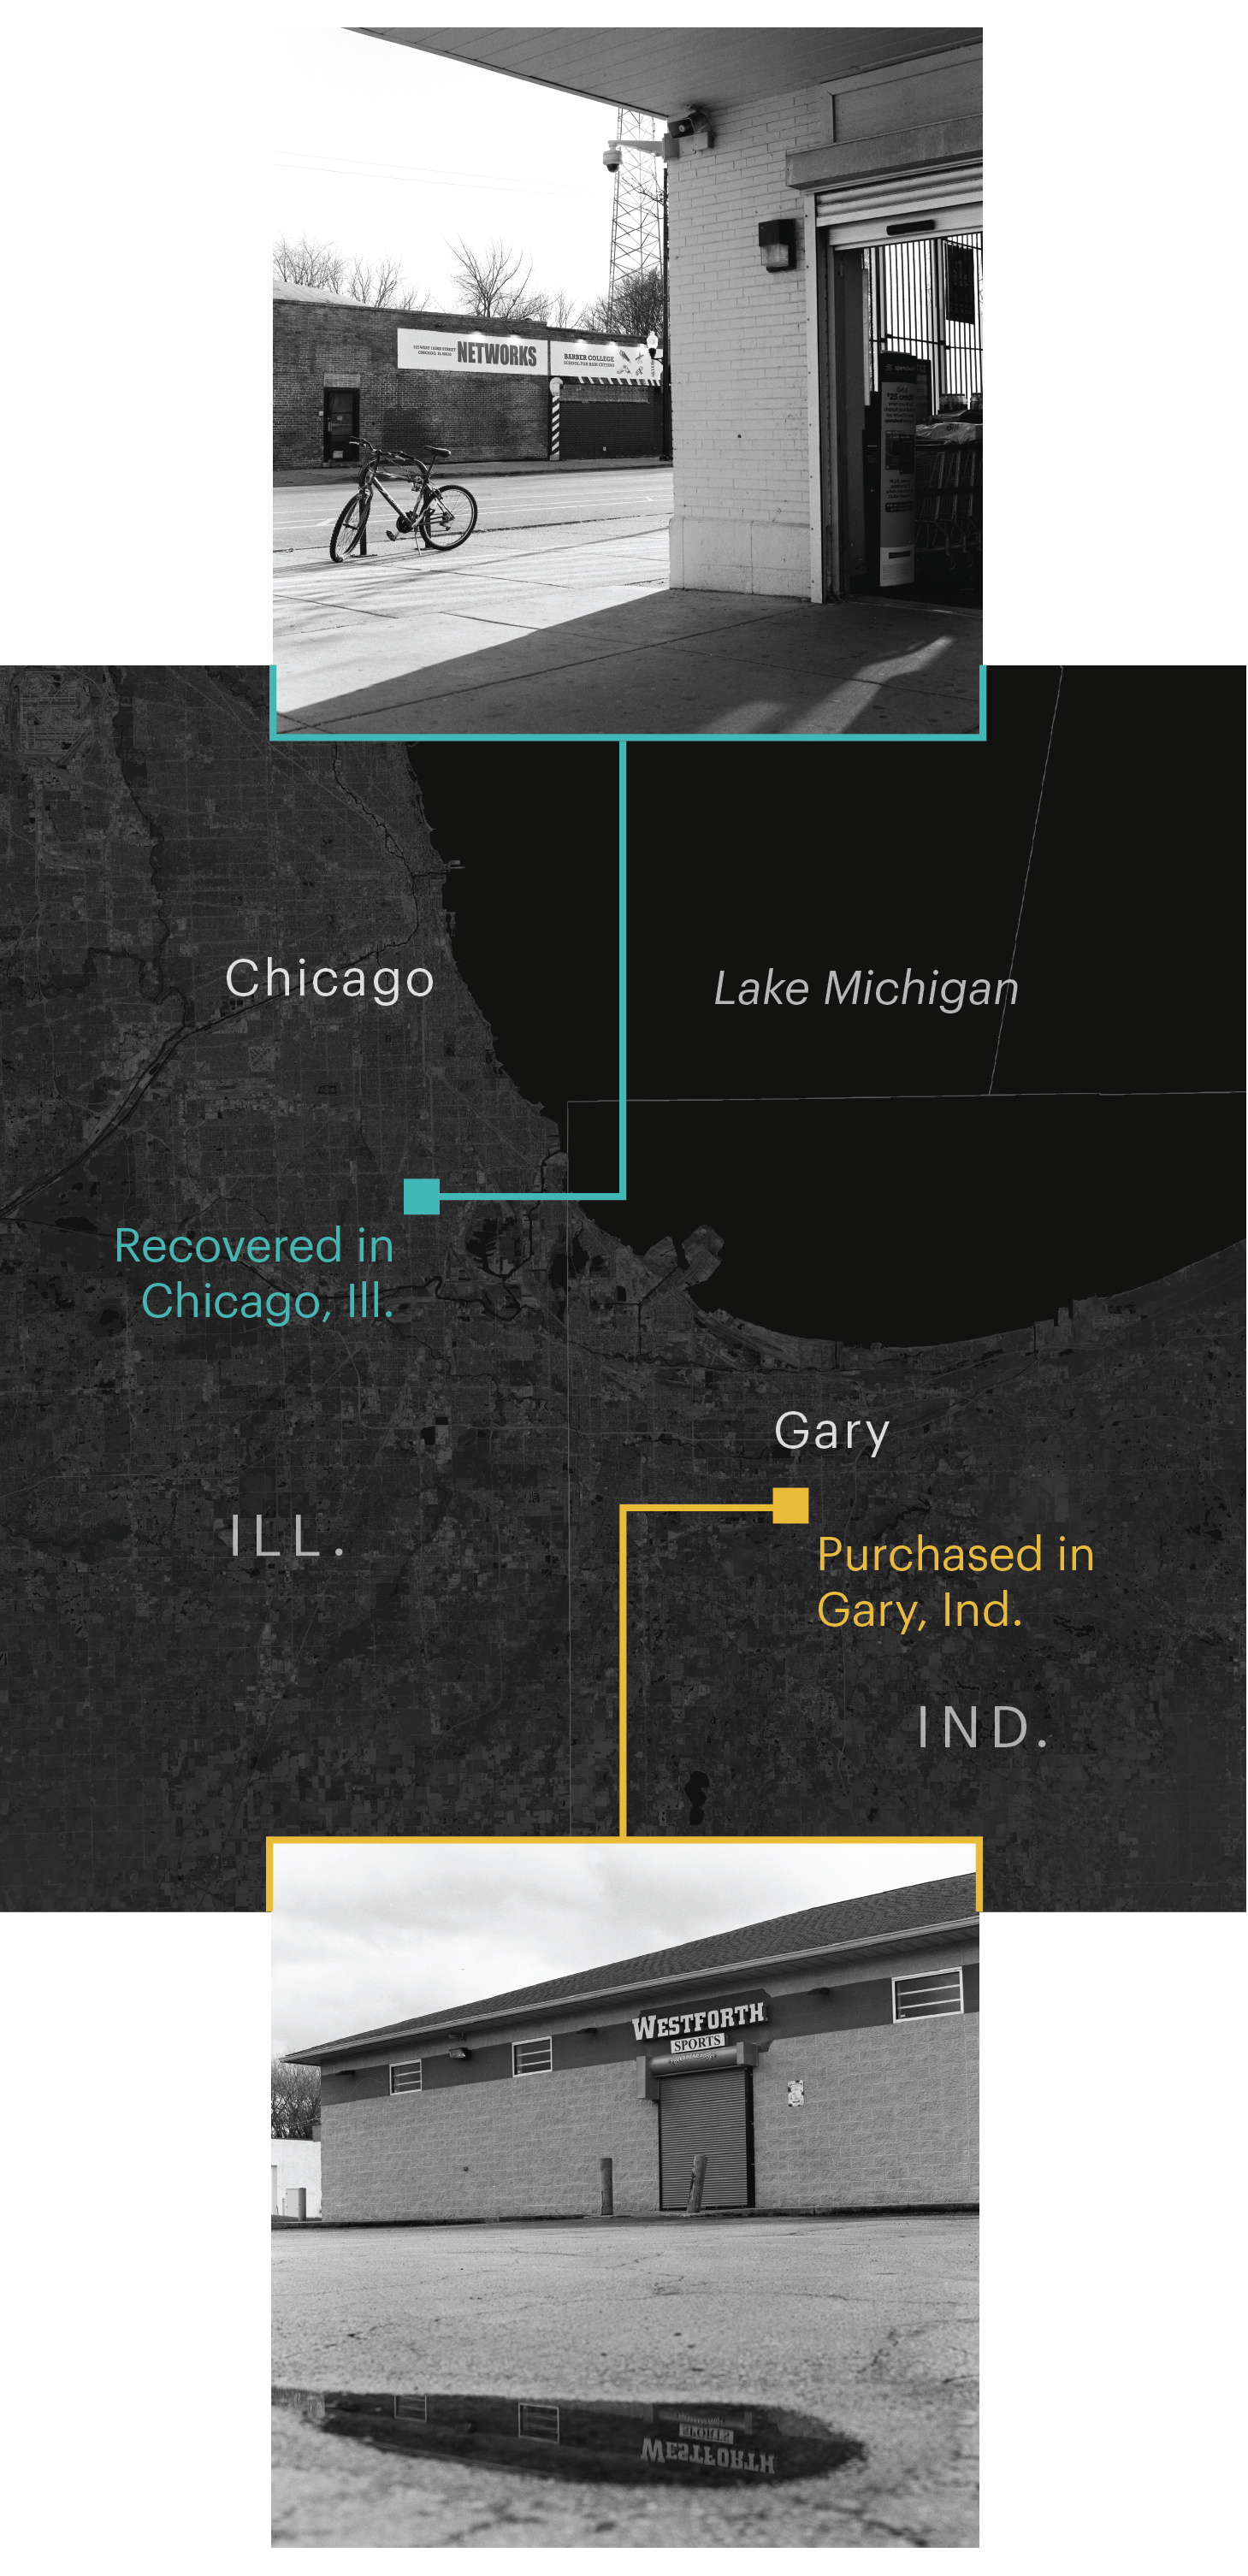 A map showing Chicago, Ill. and Gary, Ind.